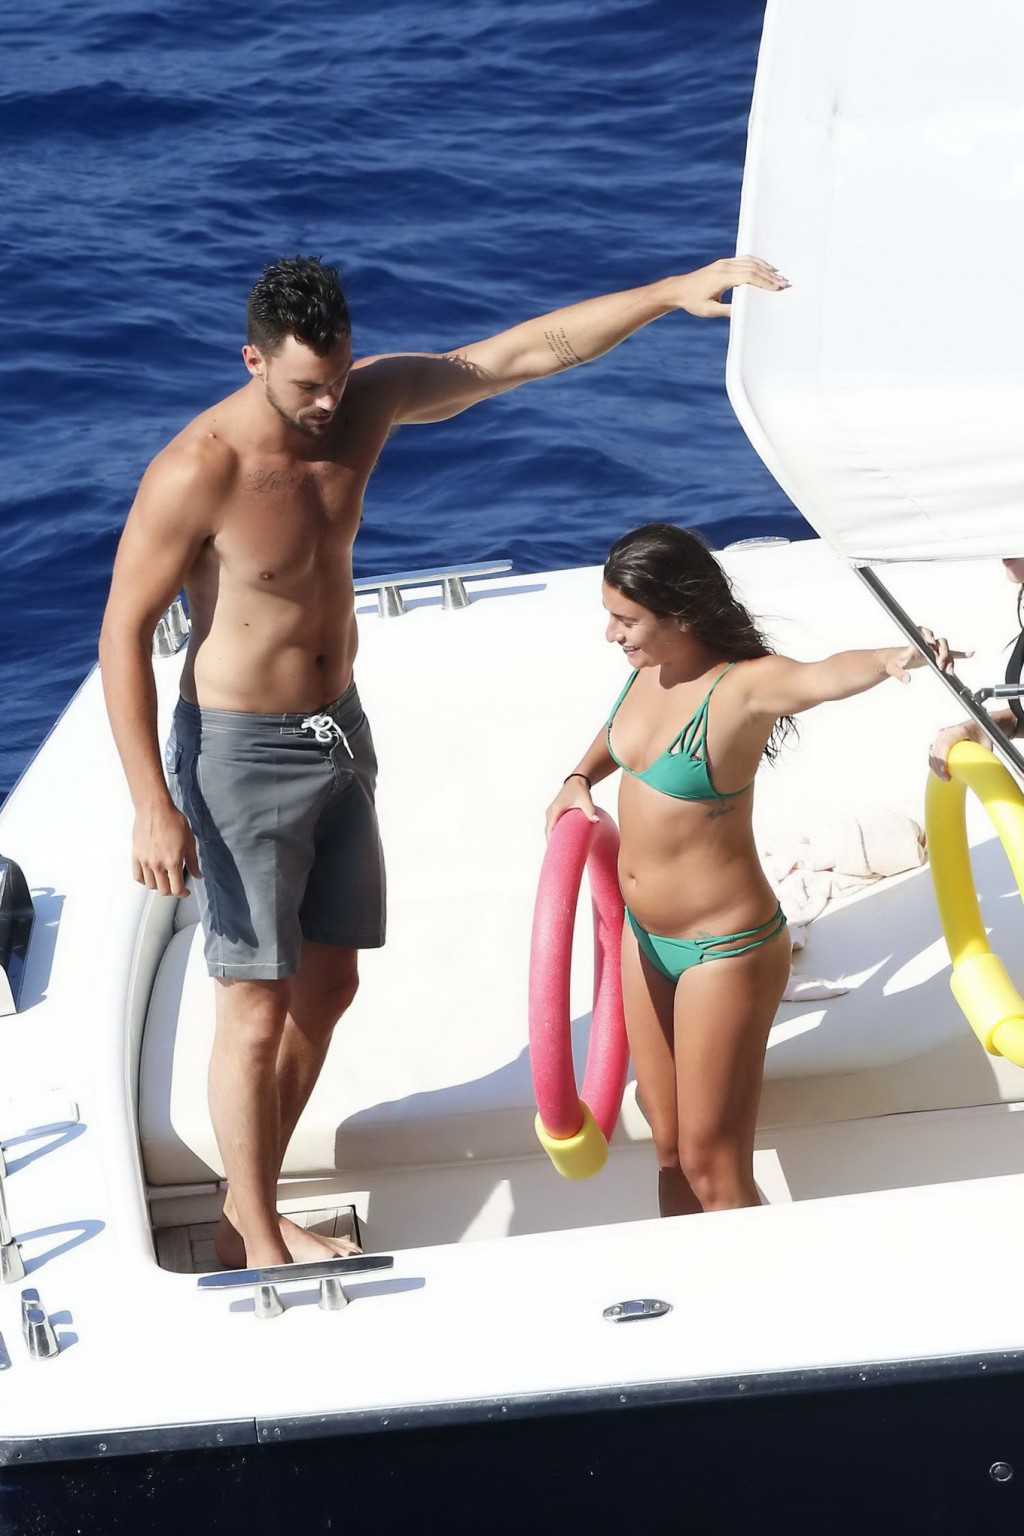 Lea Michele nipple slip from her tiny green bikini on the boat during a vacation #75189819